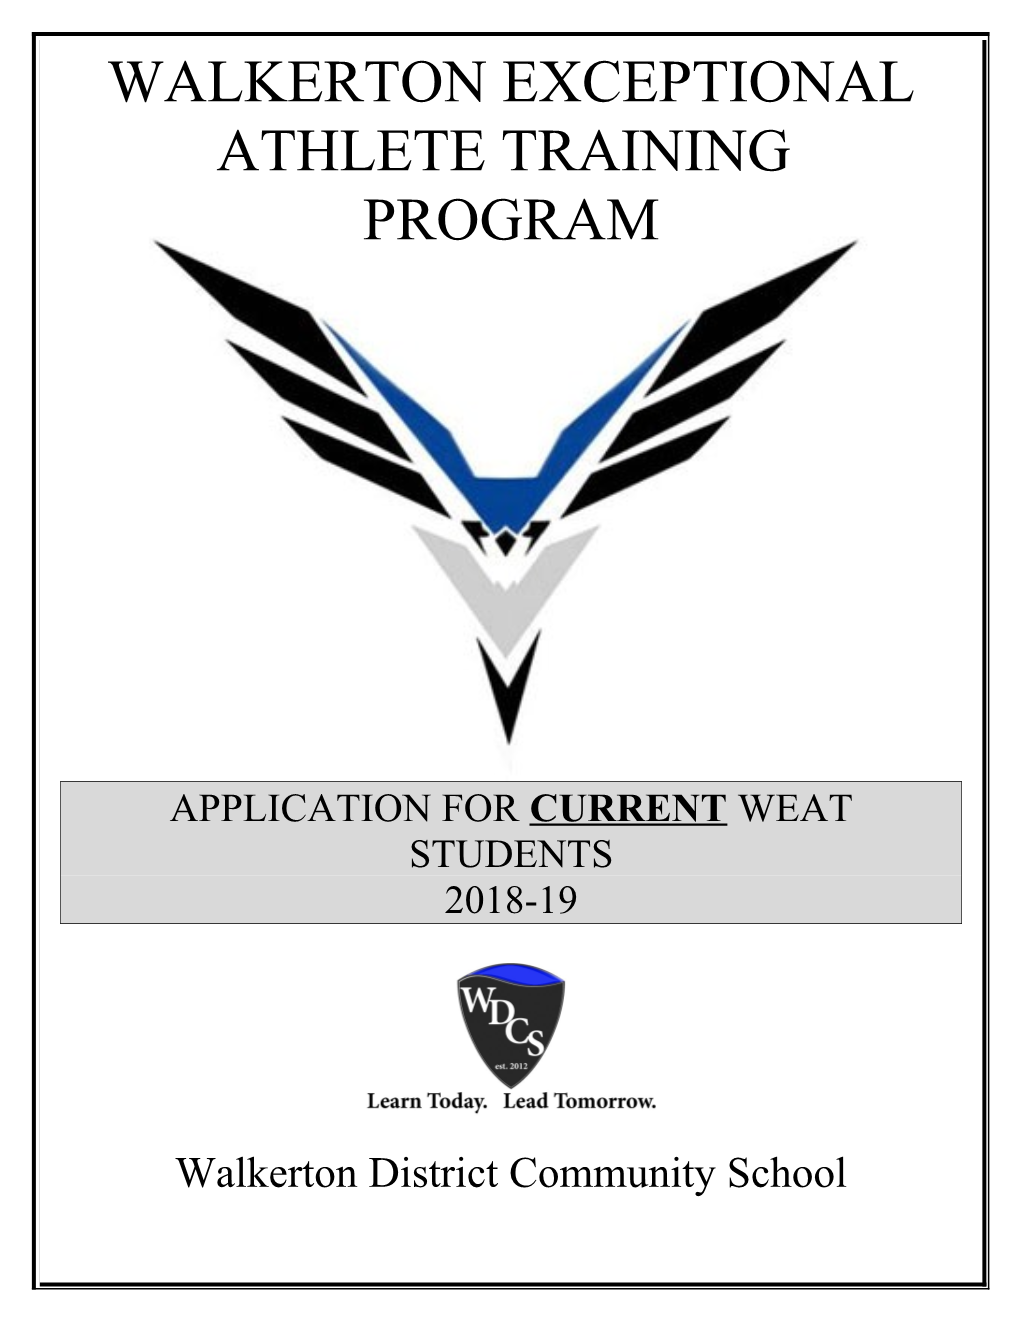 Application for Current Weat Students